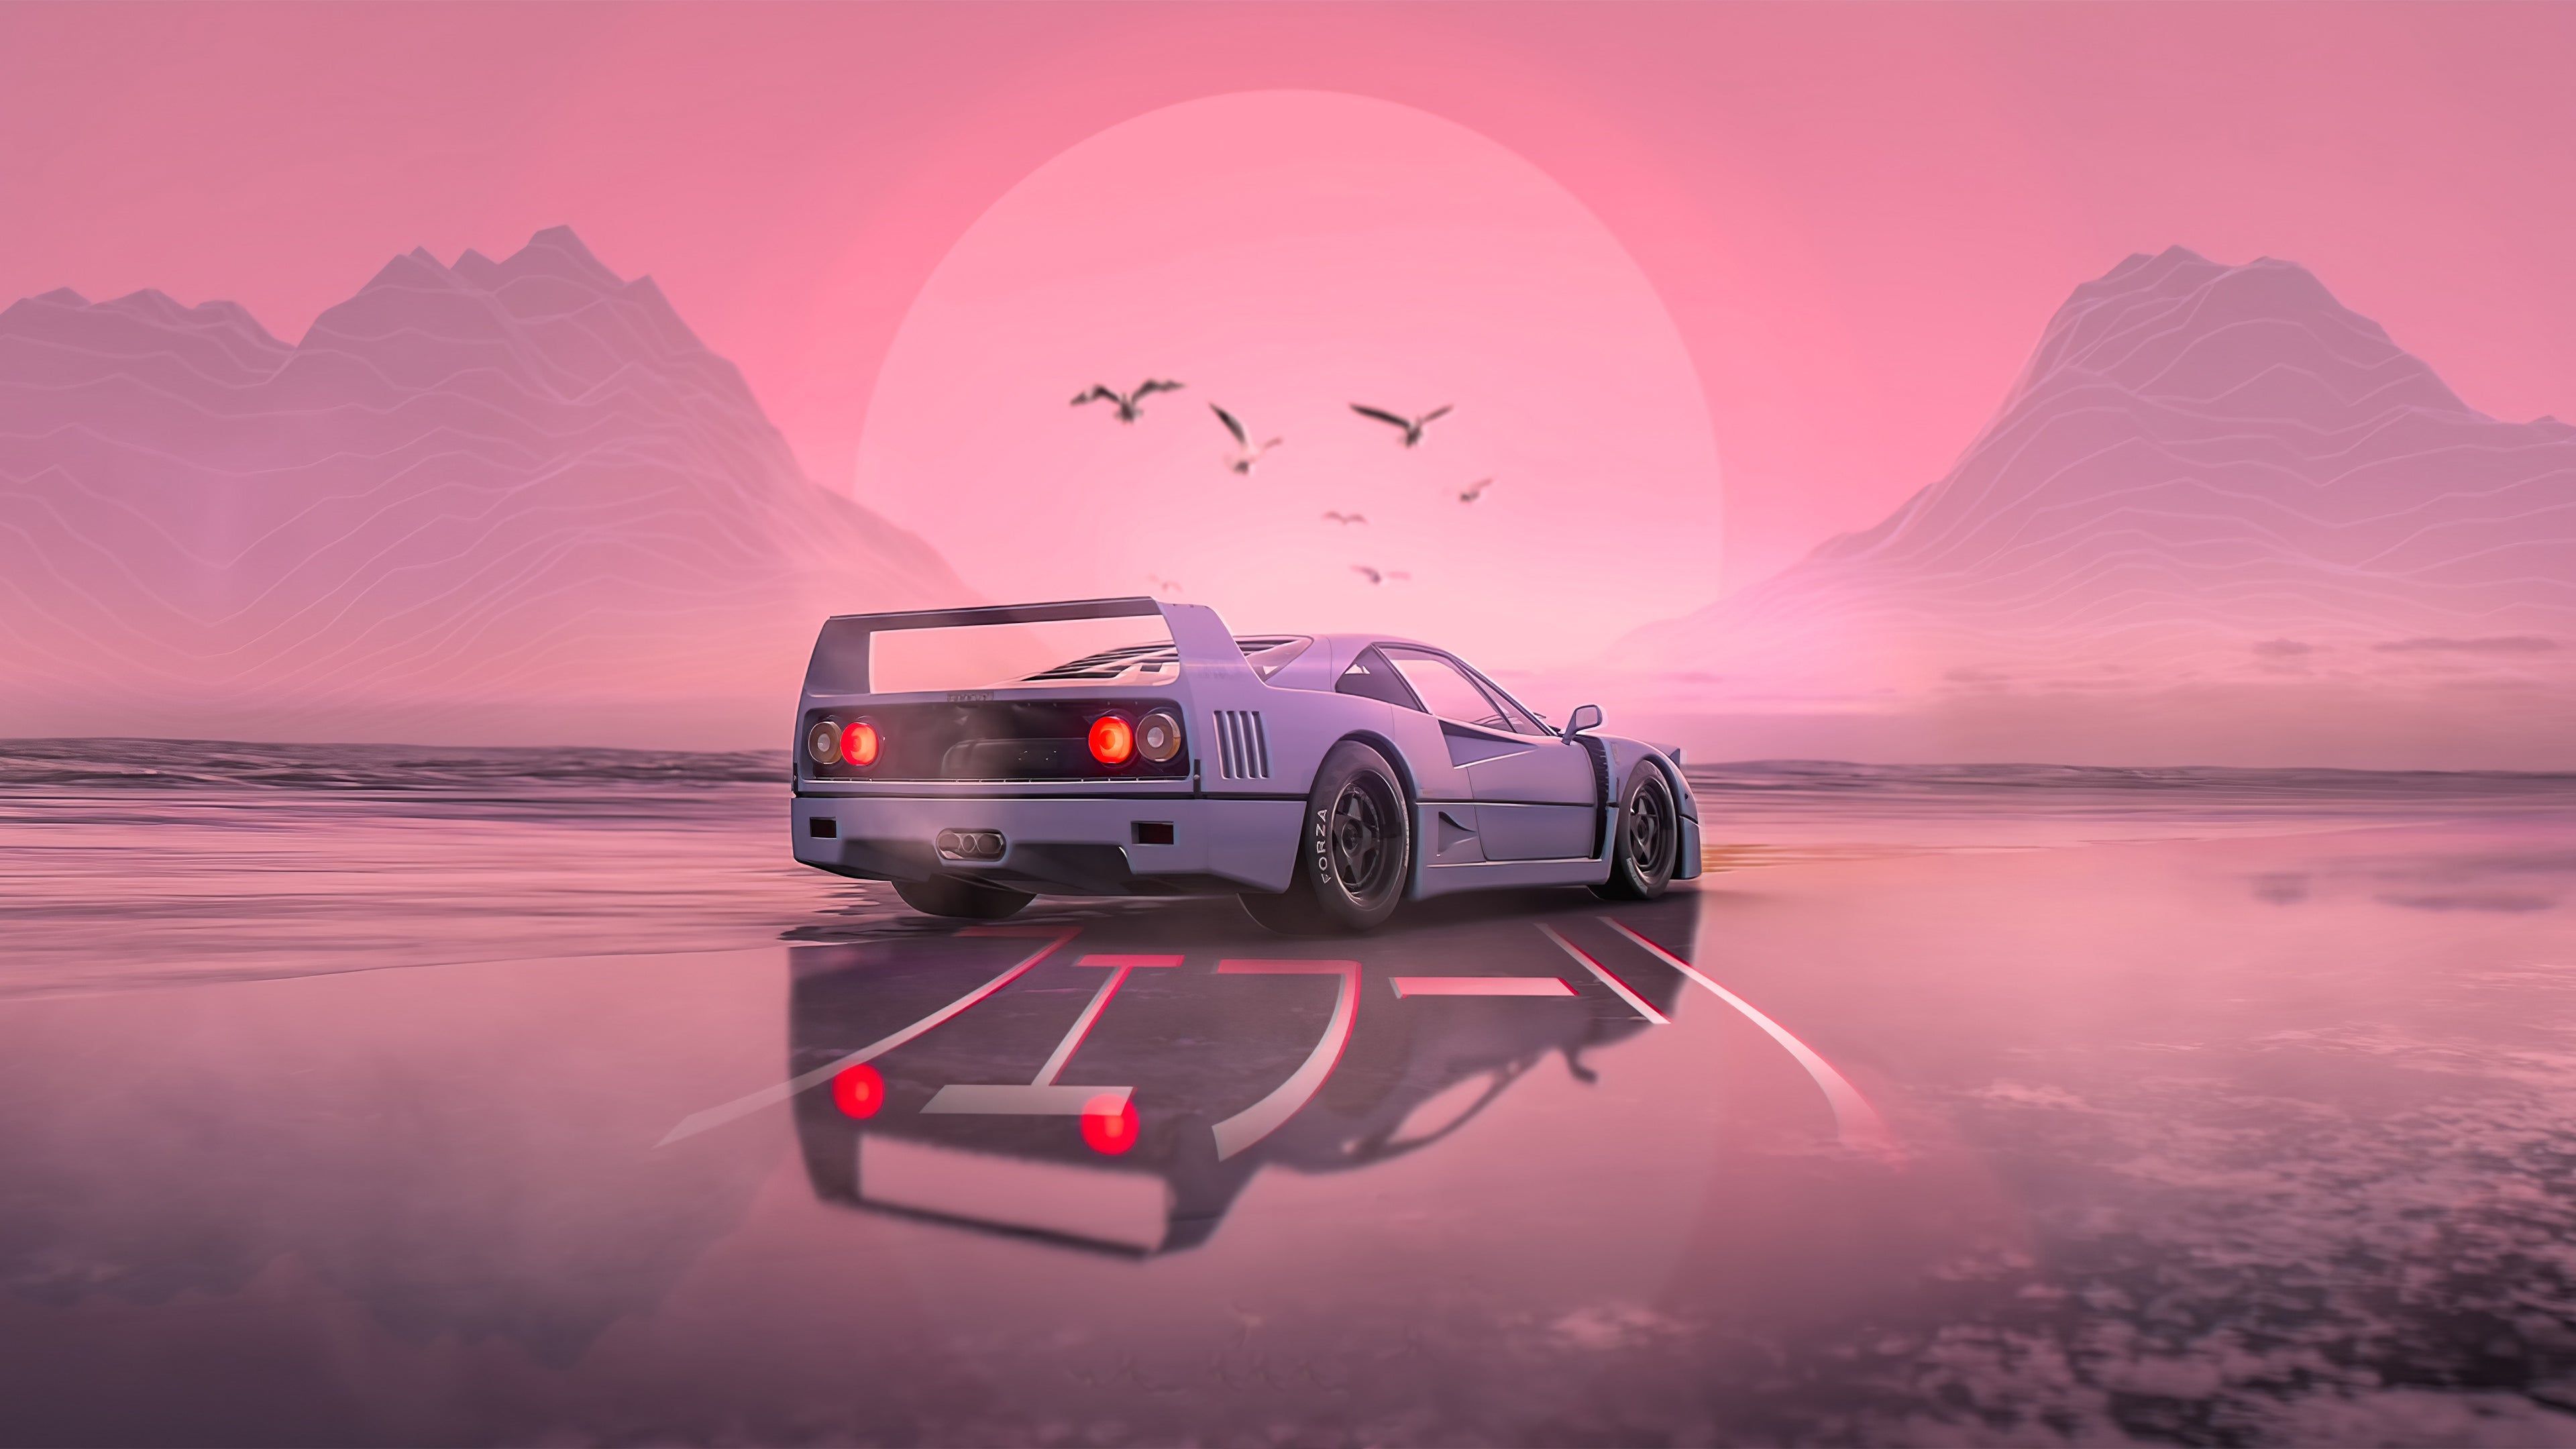 Retro Wave HD Wallpapers Free Download 